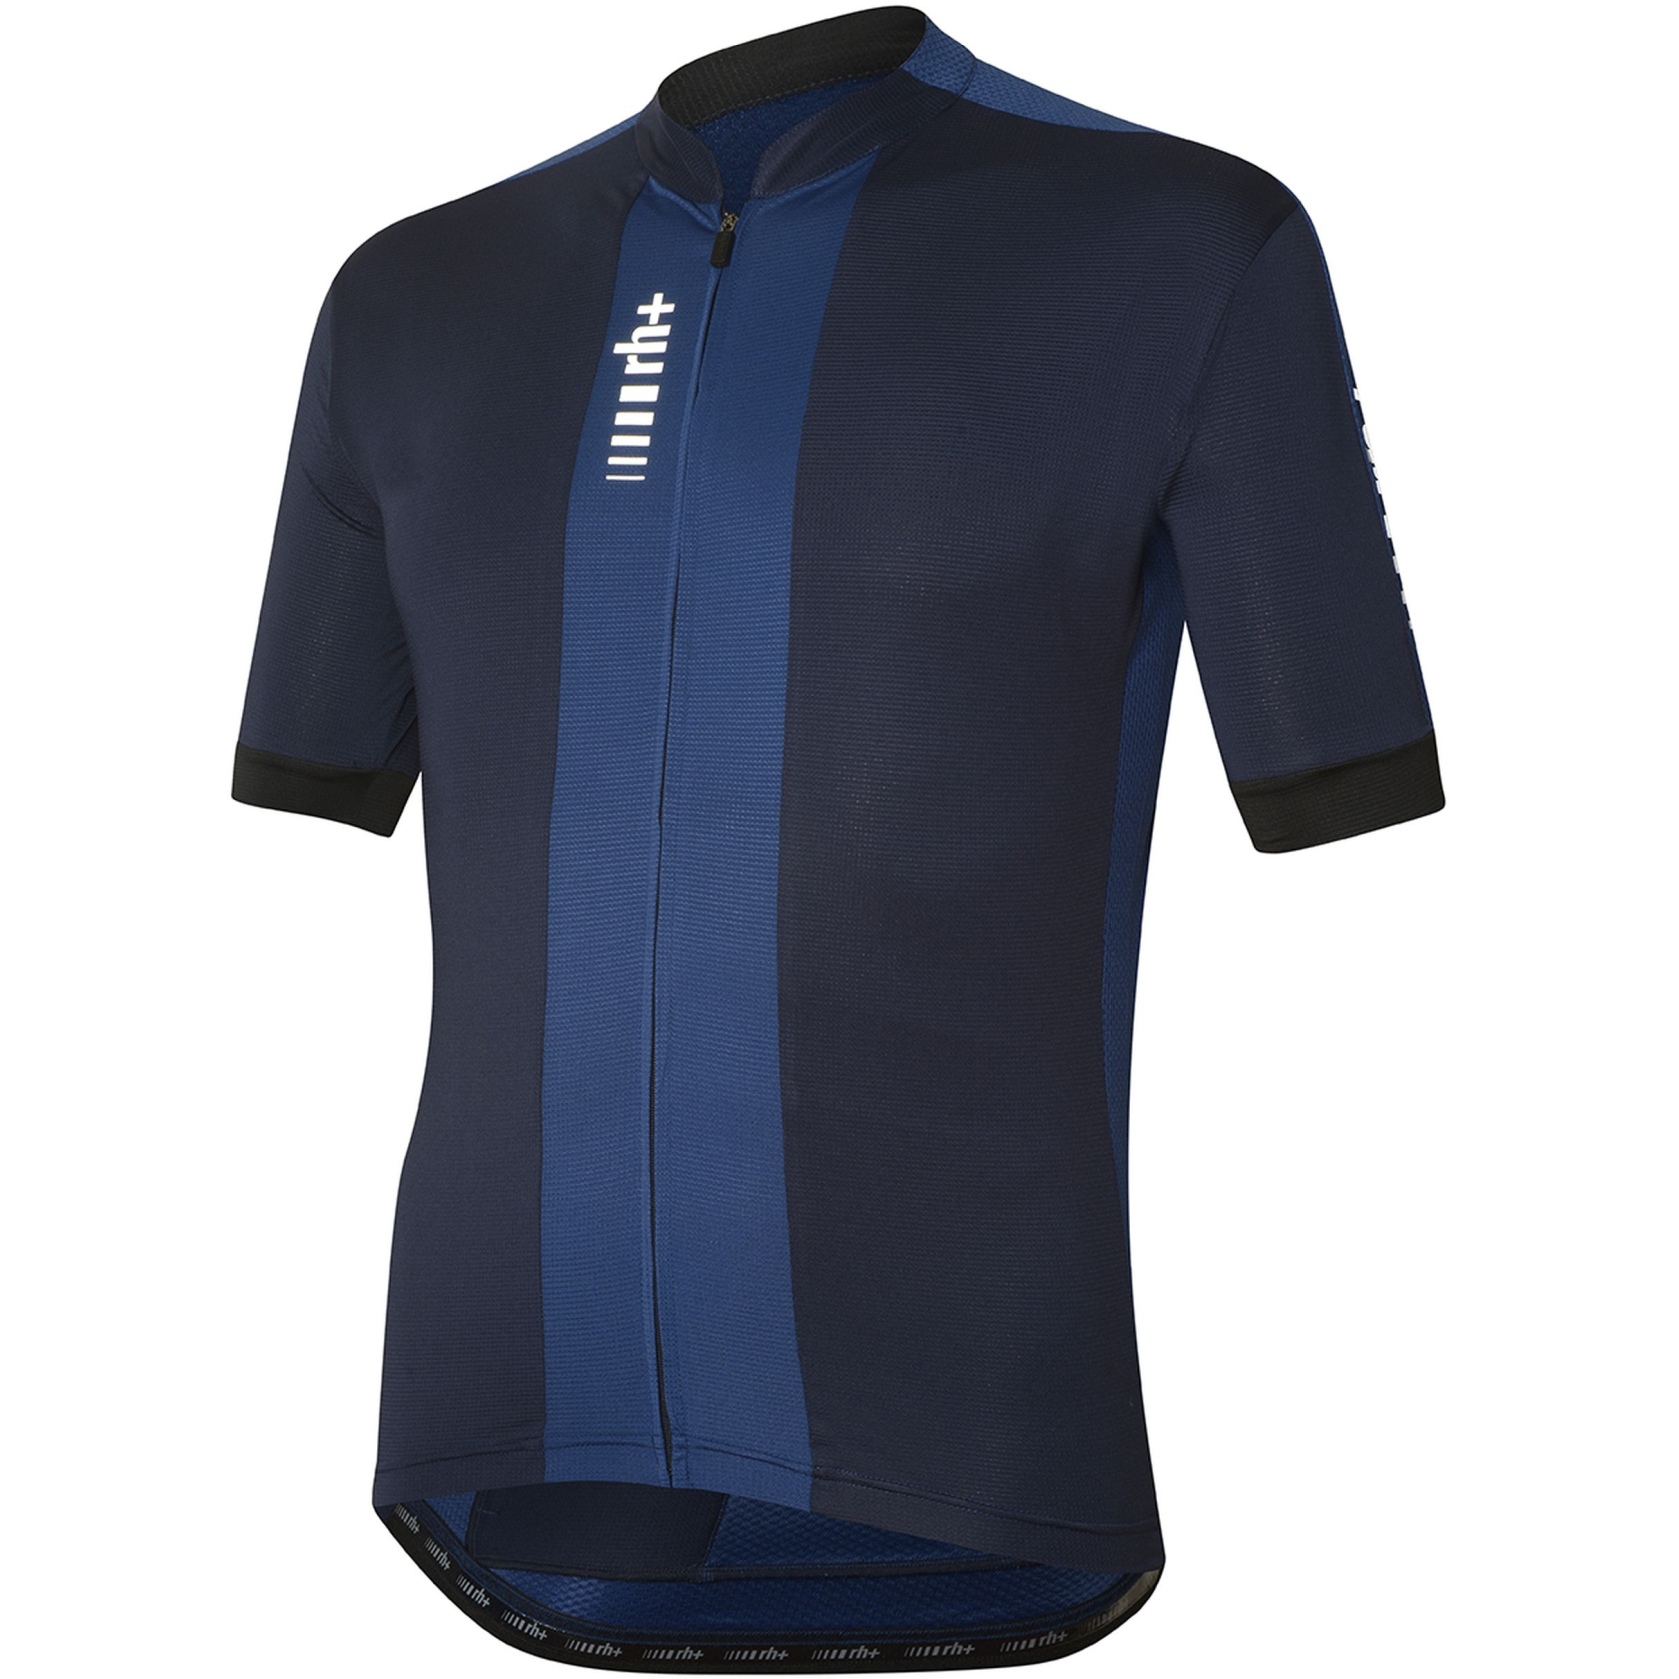 Picture of rh+ New Primo Jersey Men - Absolute Blue/Indigo/Black